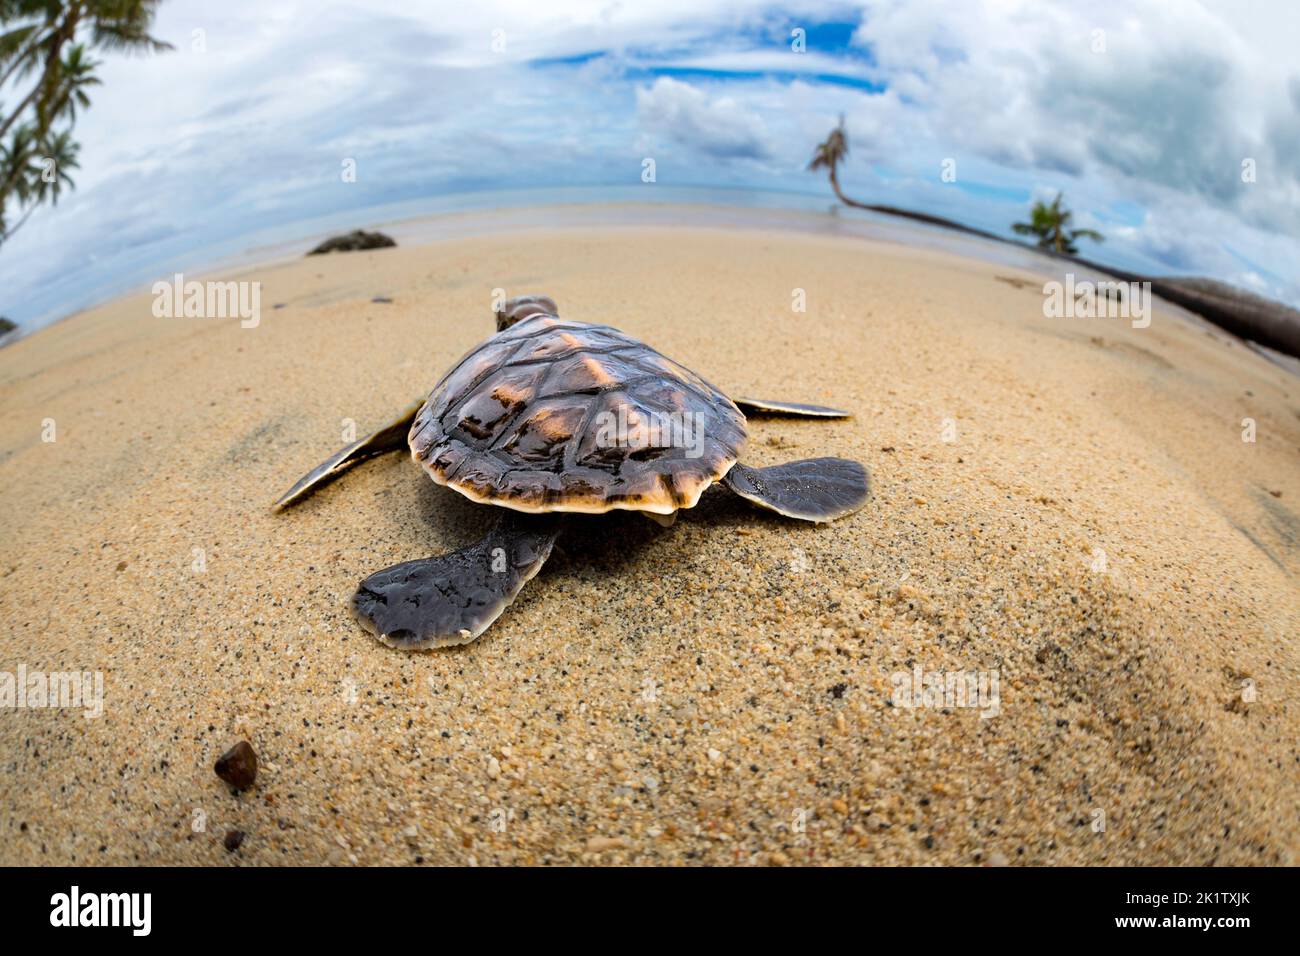 A newly hatched baby green sea turtle, Chelonia mydas, an endangered species, makes it's way across the beach to the ocean off the island of Yap, Micr Stock Photo